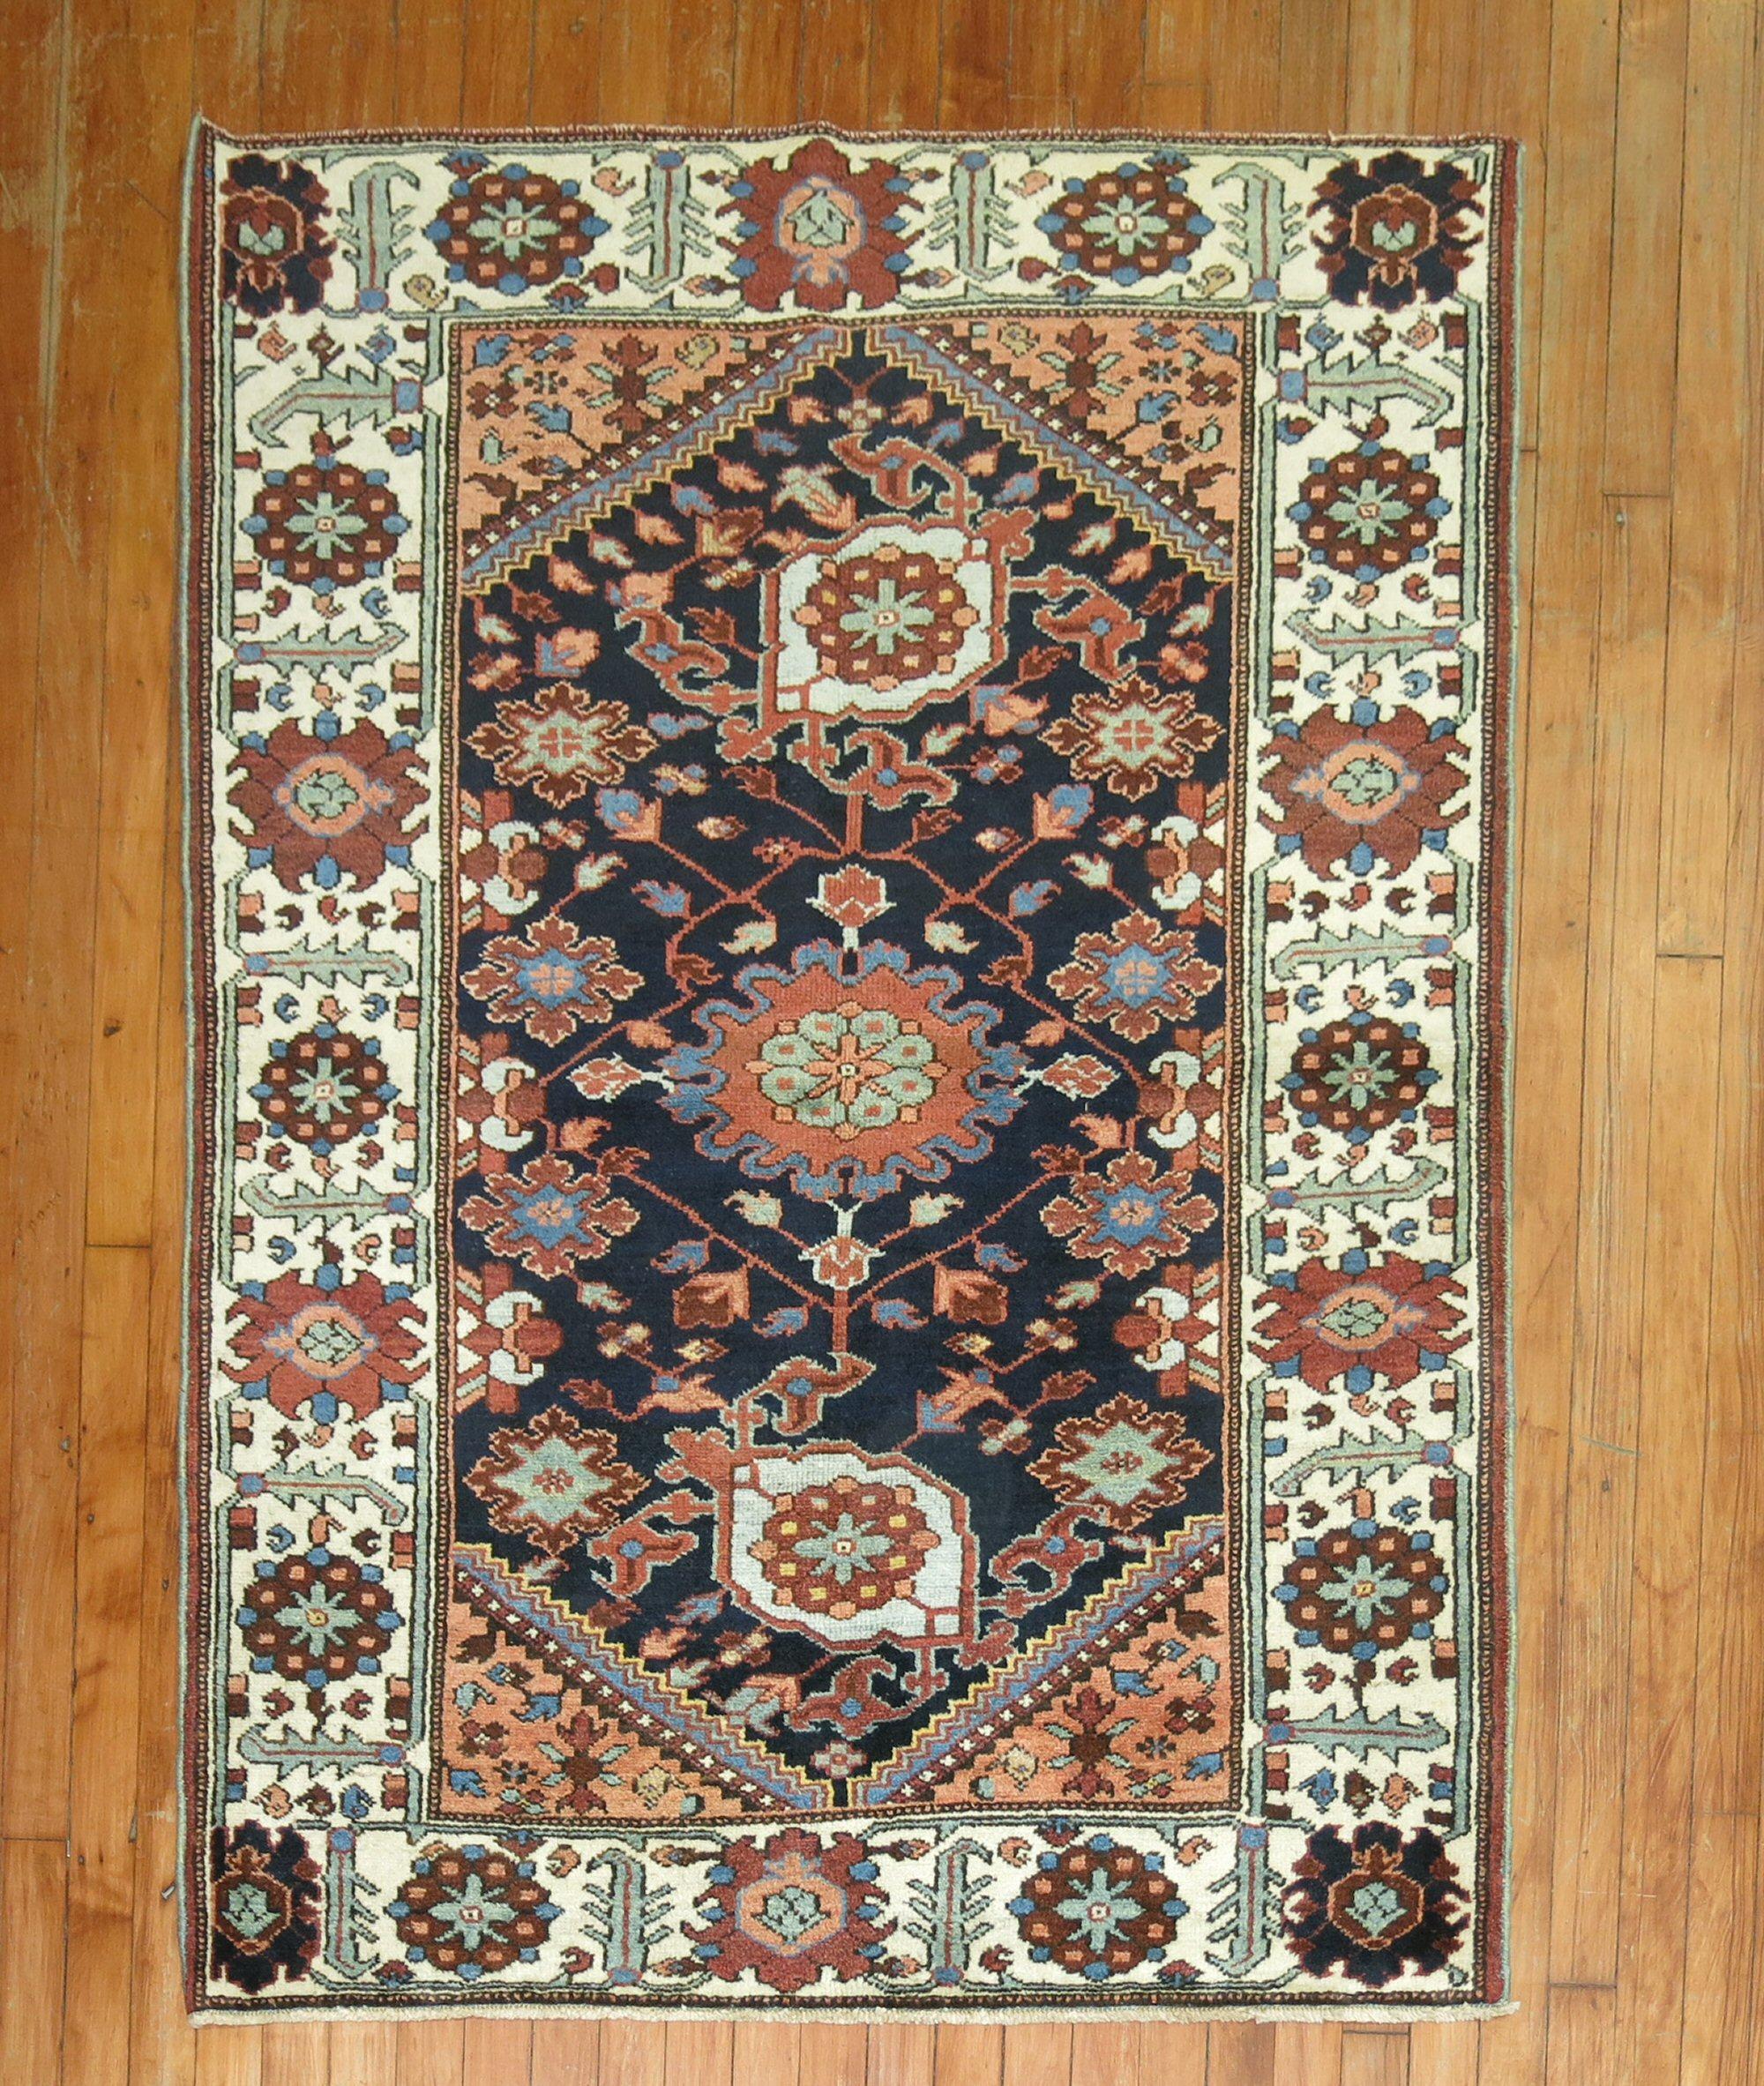 1930s Persian Bakhtiar rug with a large scale all over design on a navy field

Measures: 3'9'' x 5'.